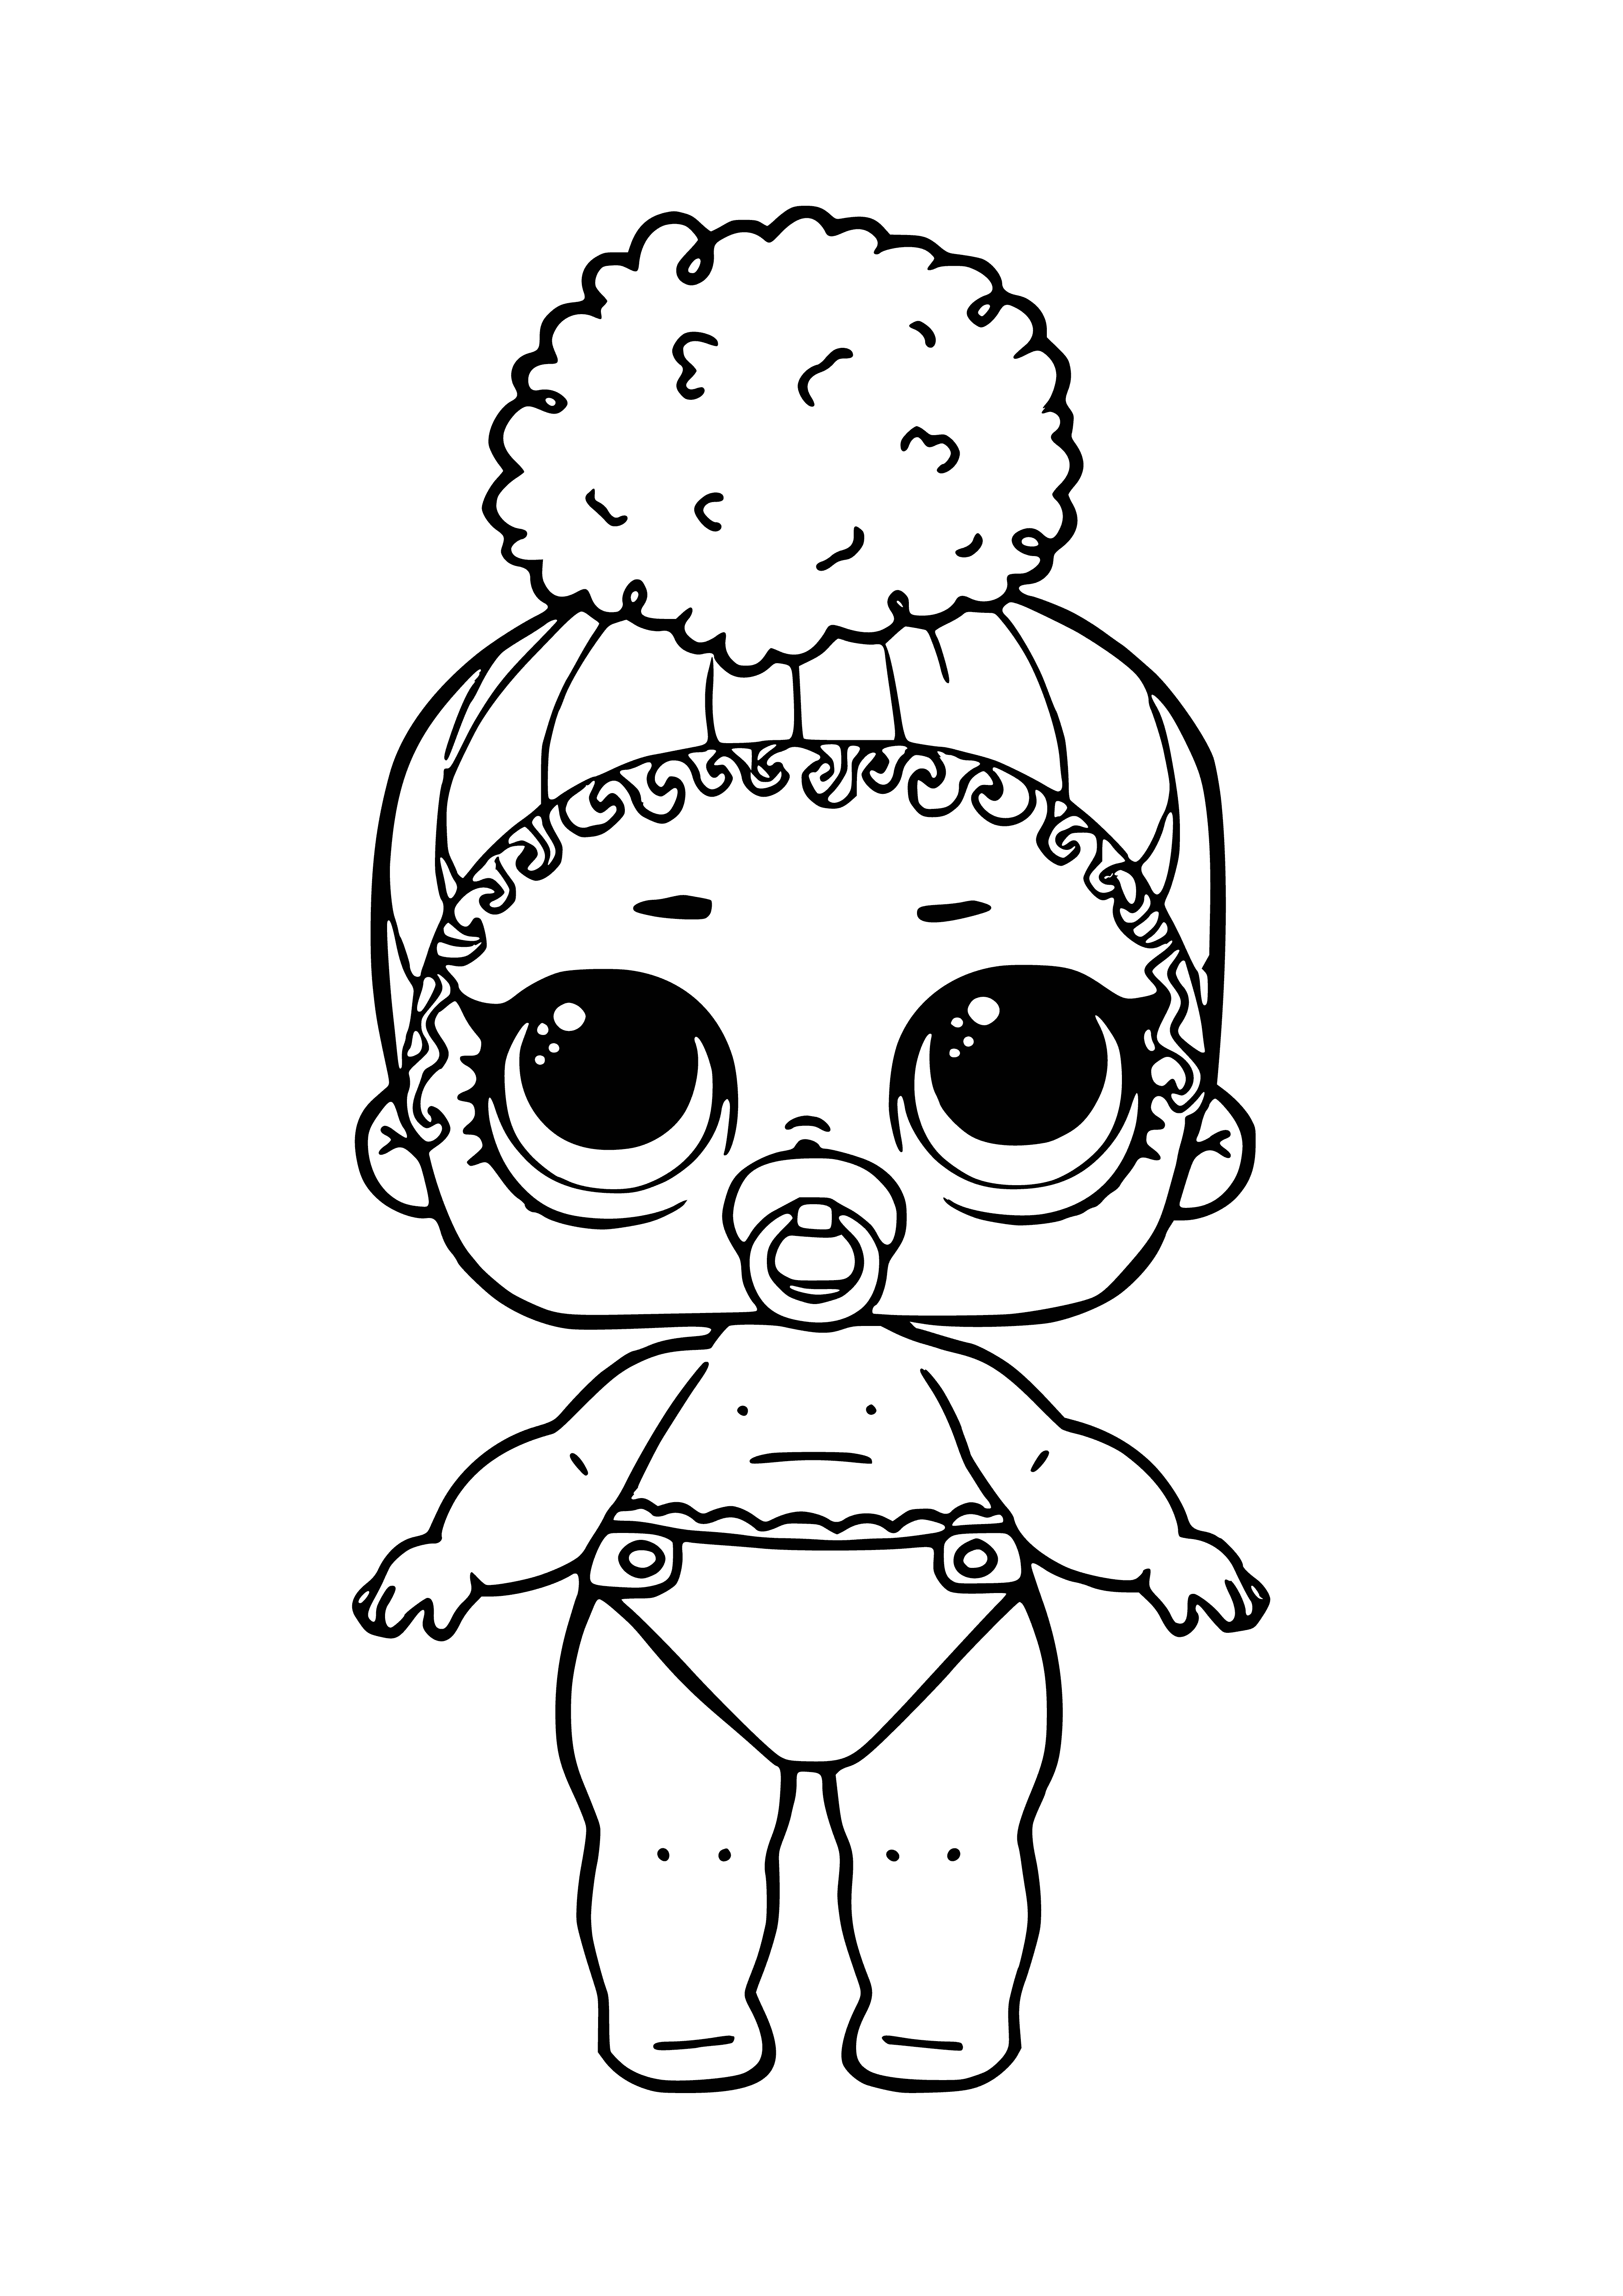 LOL baby Boss coloring page